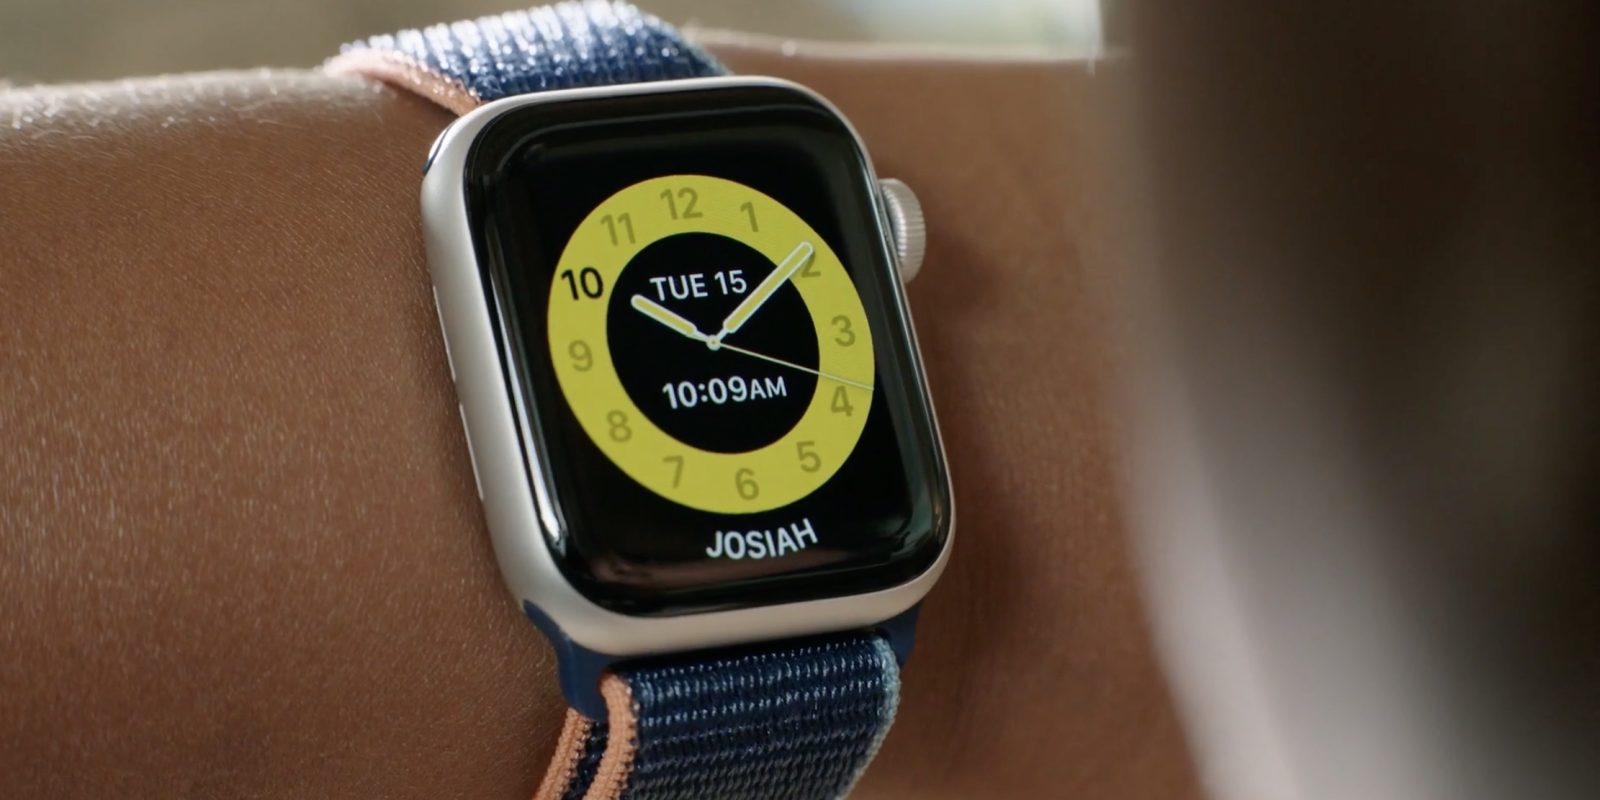 How to use Apple Watch Schooltime feature